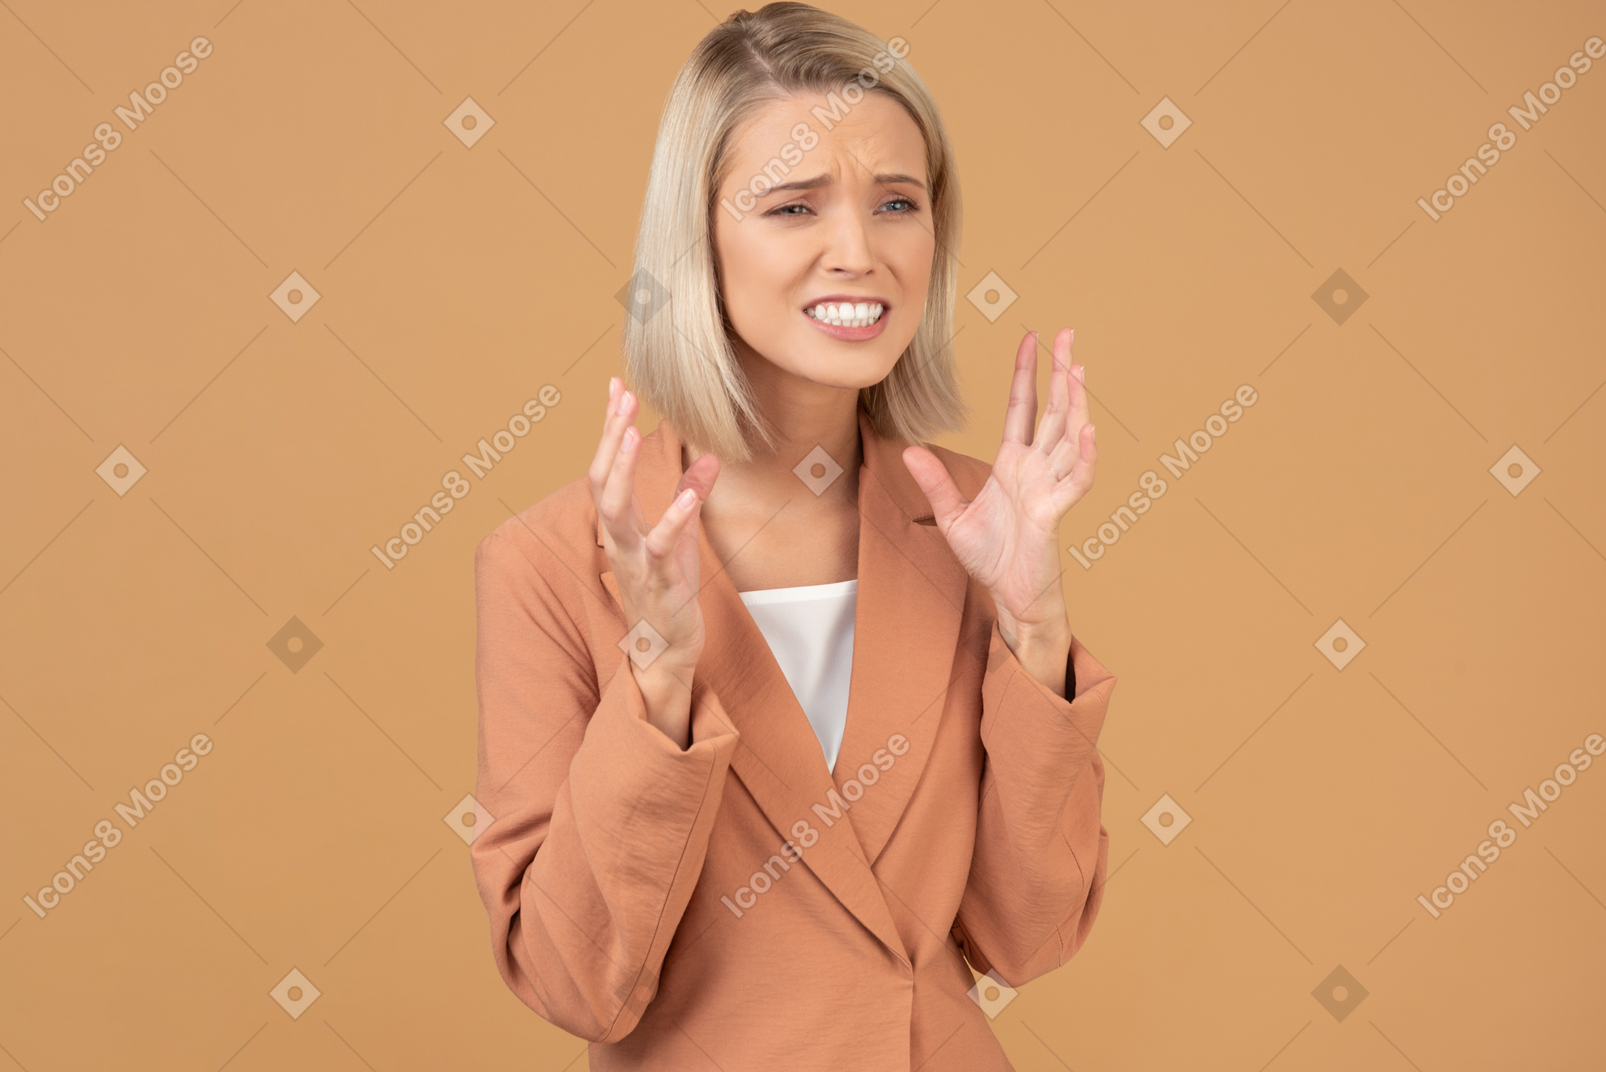 Upset young woman with raised hands